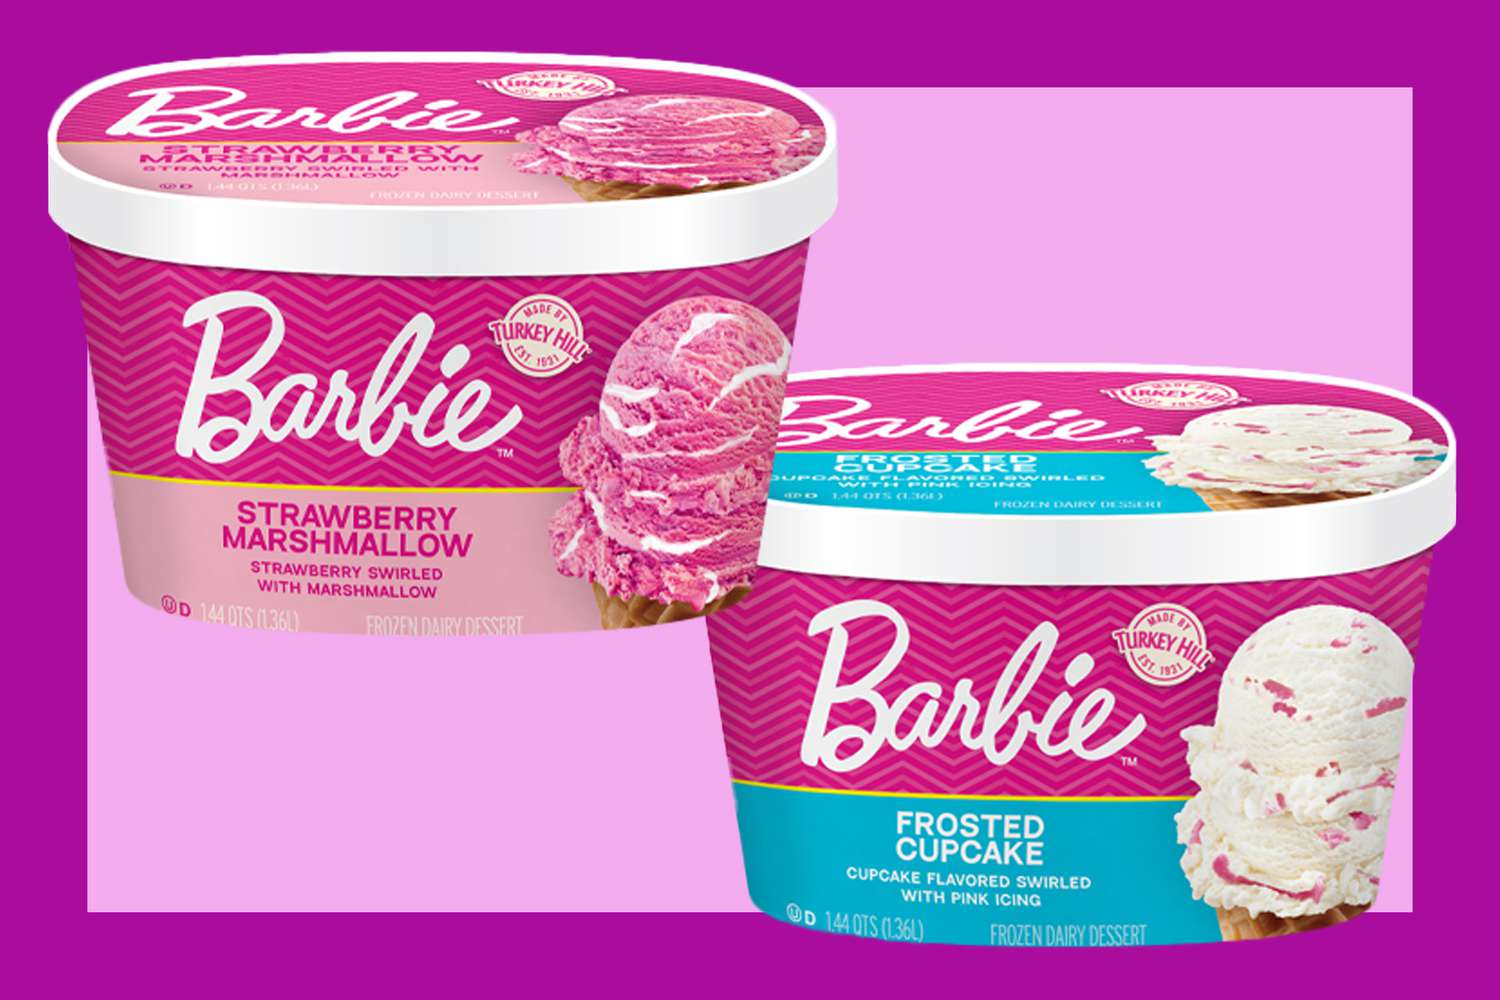 Turkey Hill Releases 2 Barbie-Themed Ice Cream Flavors [Video]